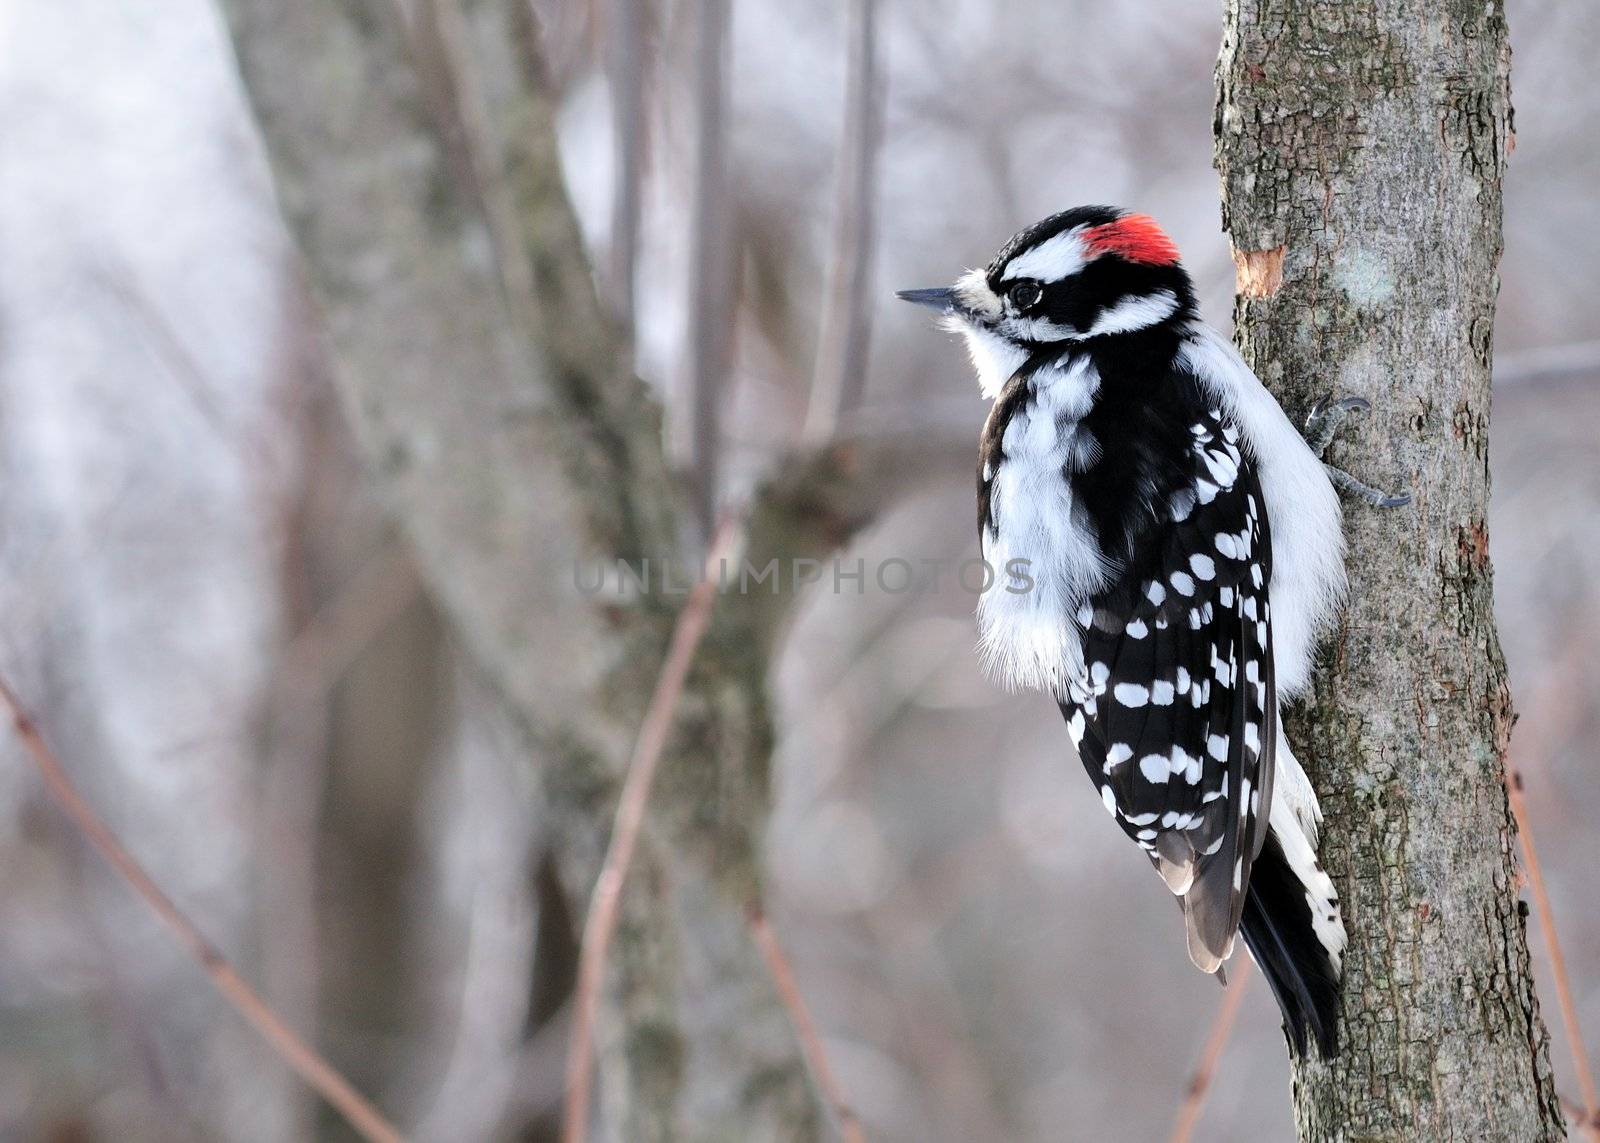 A male downy woodpecker perched on a tree trunk.